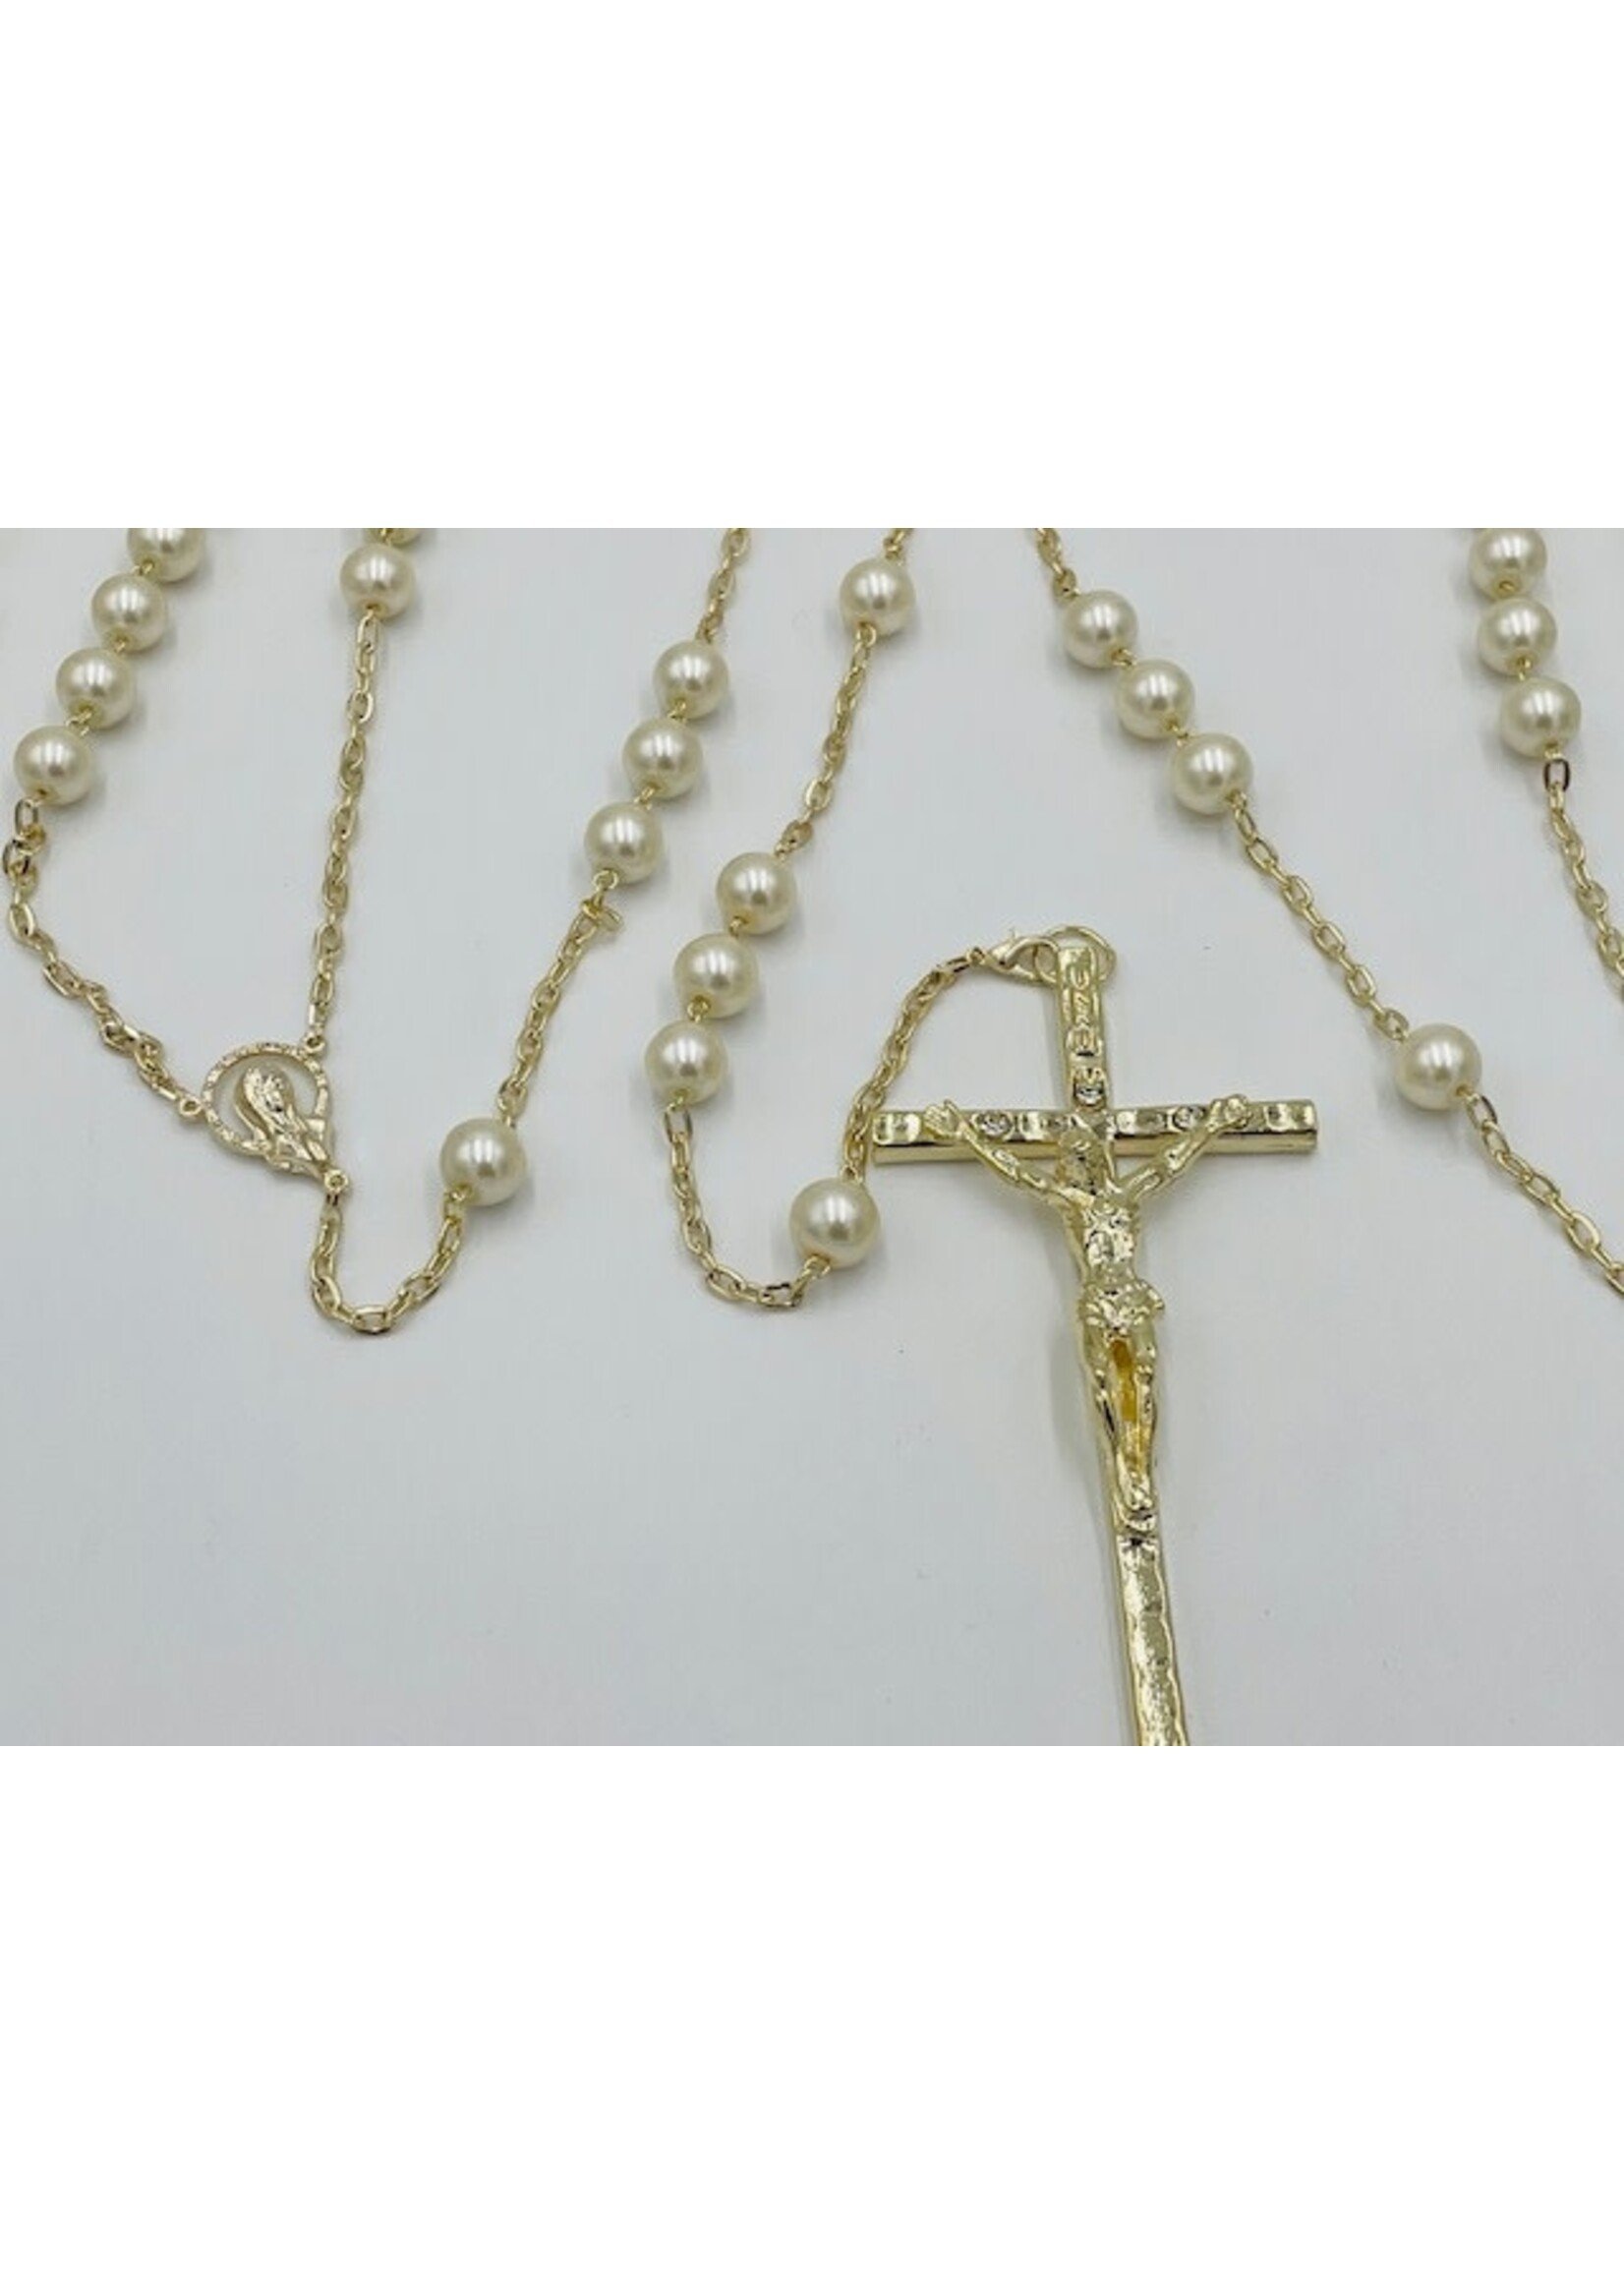 Pearl Rosary Wedding Lasso with gold-tone Crucifix